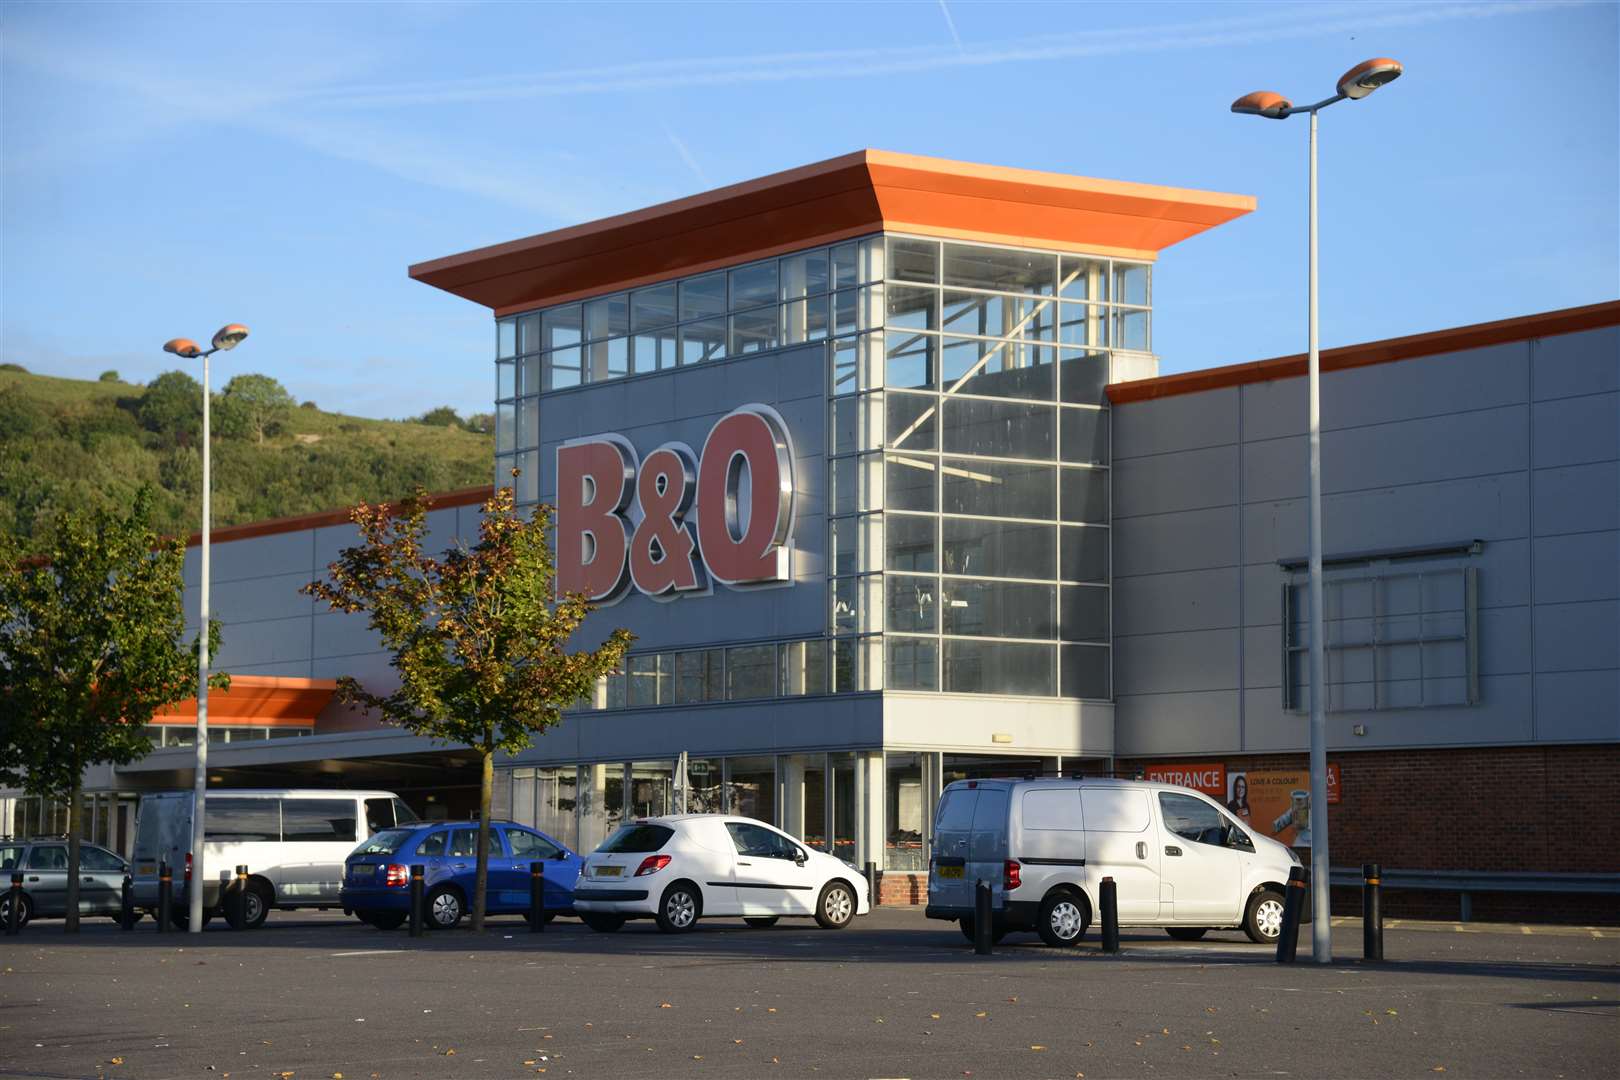 B&Q will be no more come early 2017. Picture: Gary Browne